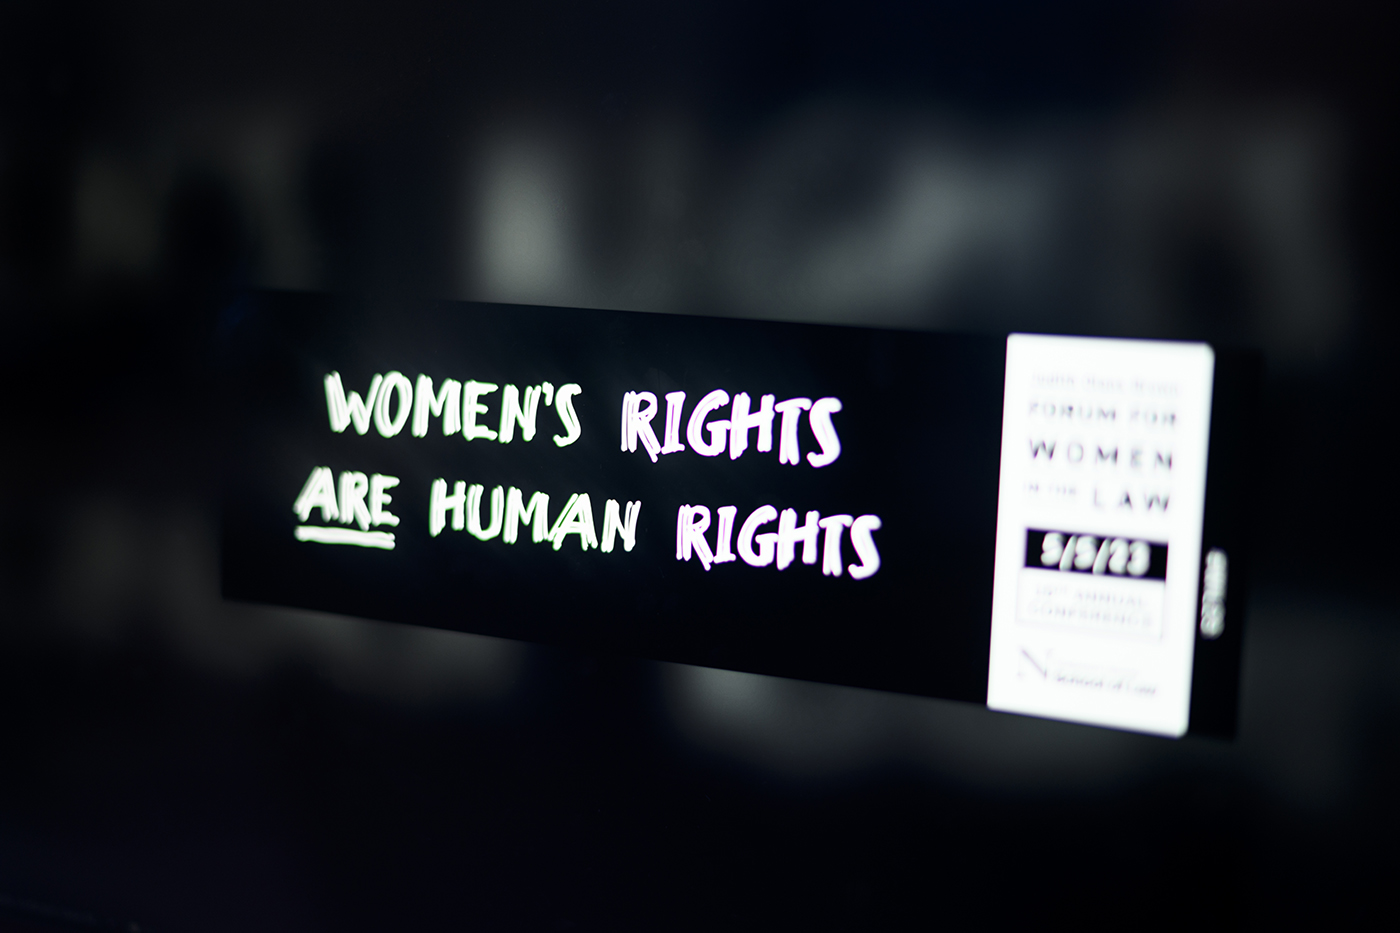 banner that says "WOMEN'S RIGHTS ARE HUMAN RIGHTS"